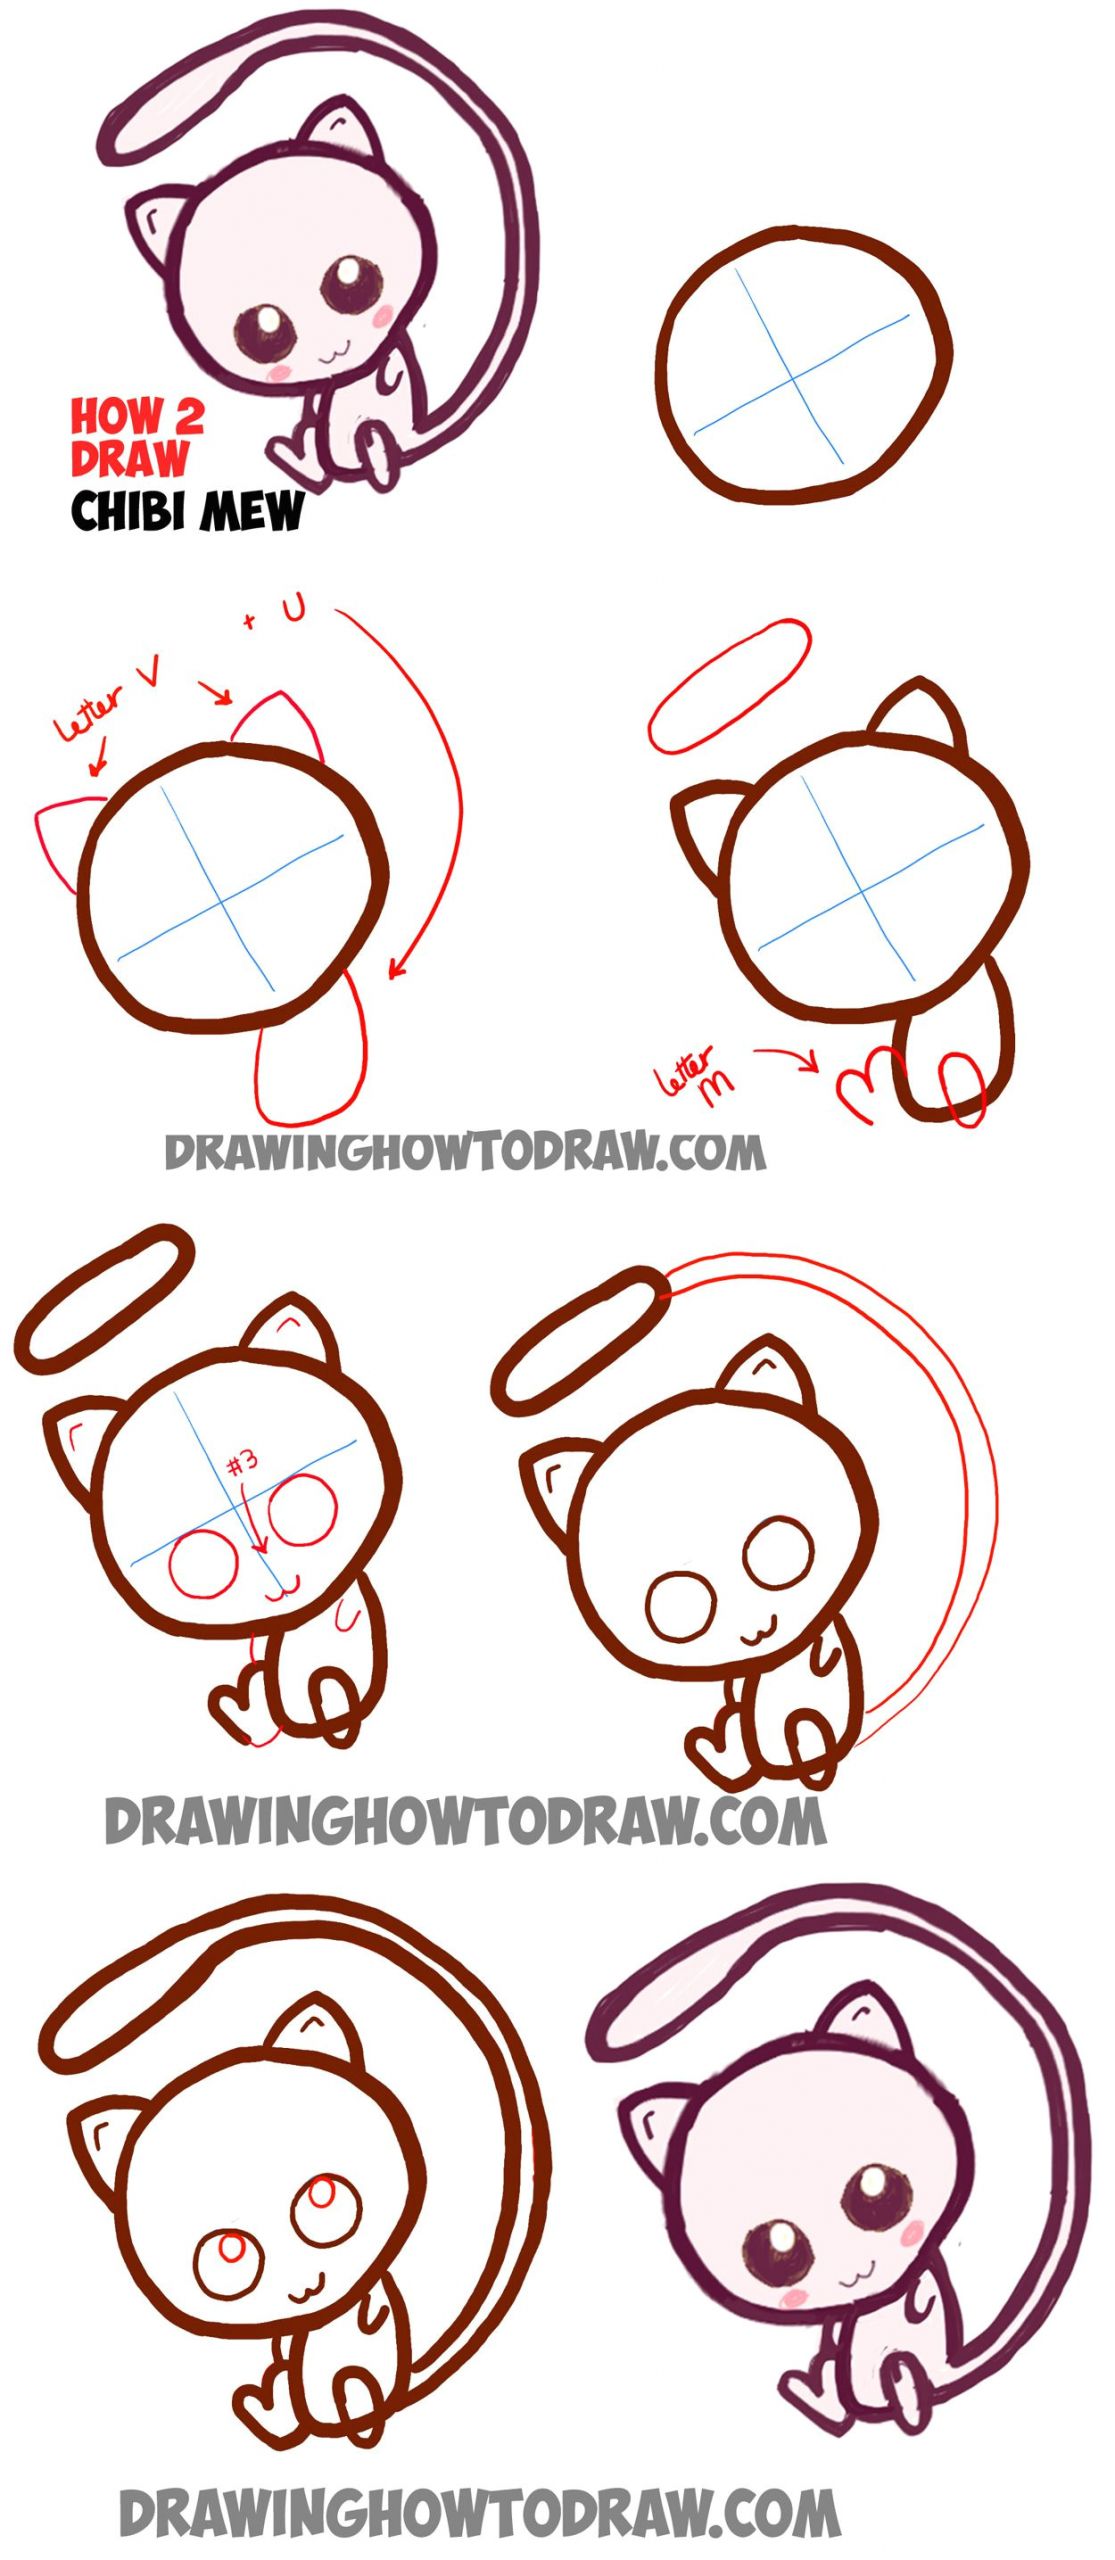 Smile Drawing Easy How to Draw Cute Baby Chibi Mew From Pokemon Easy Step by